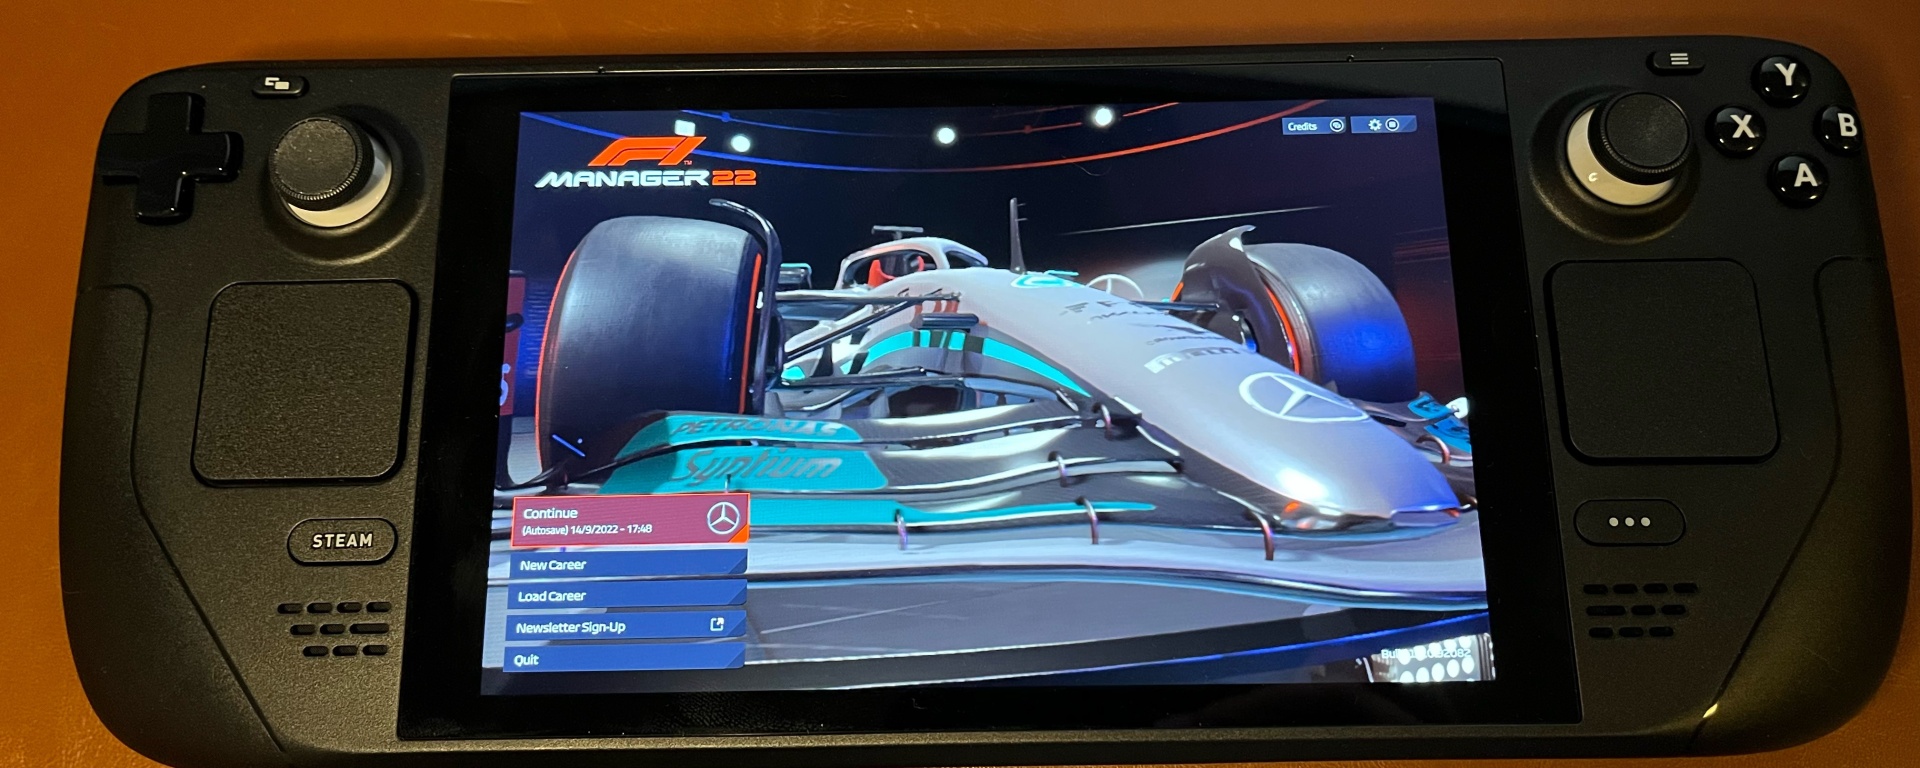 F1 Manager 22 start screen on the Steam Deck